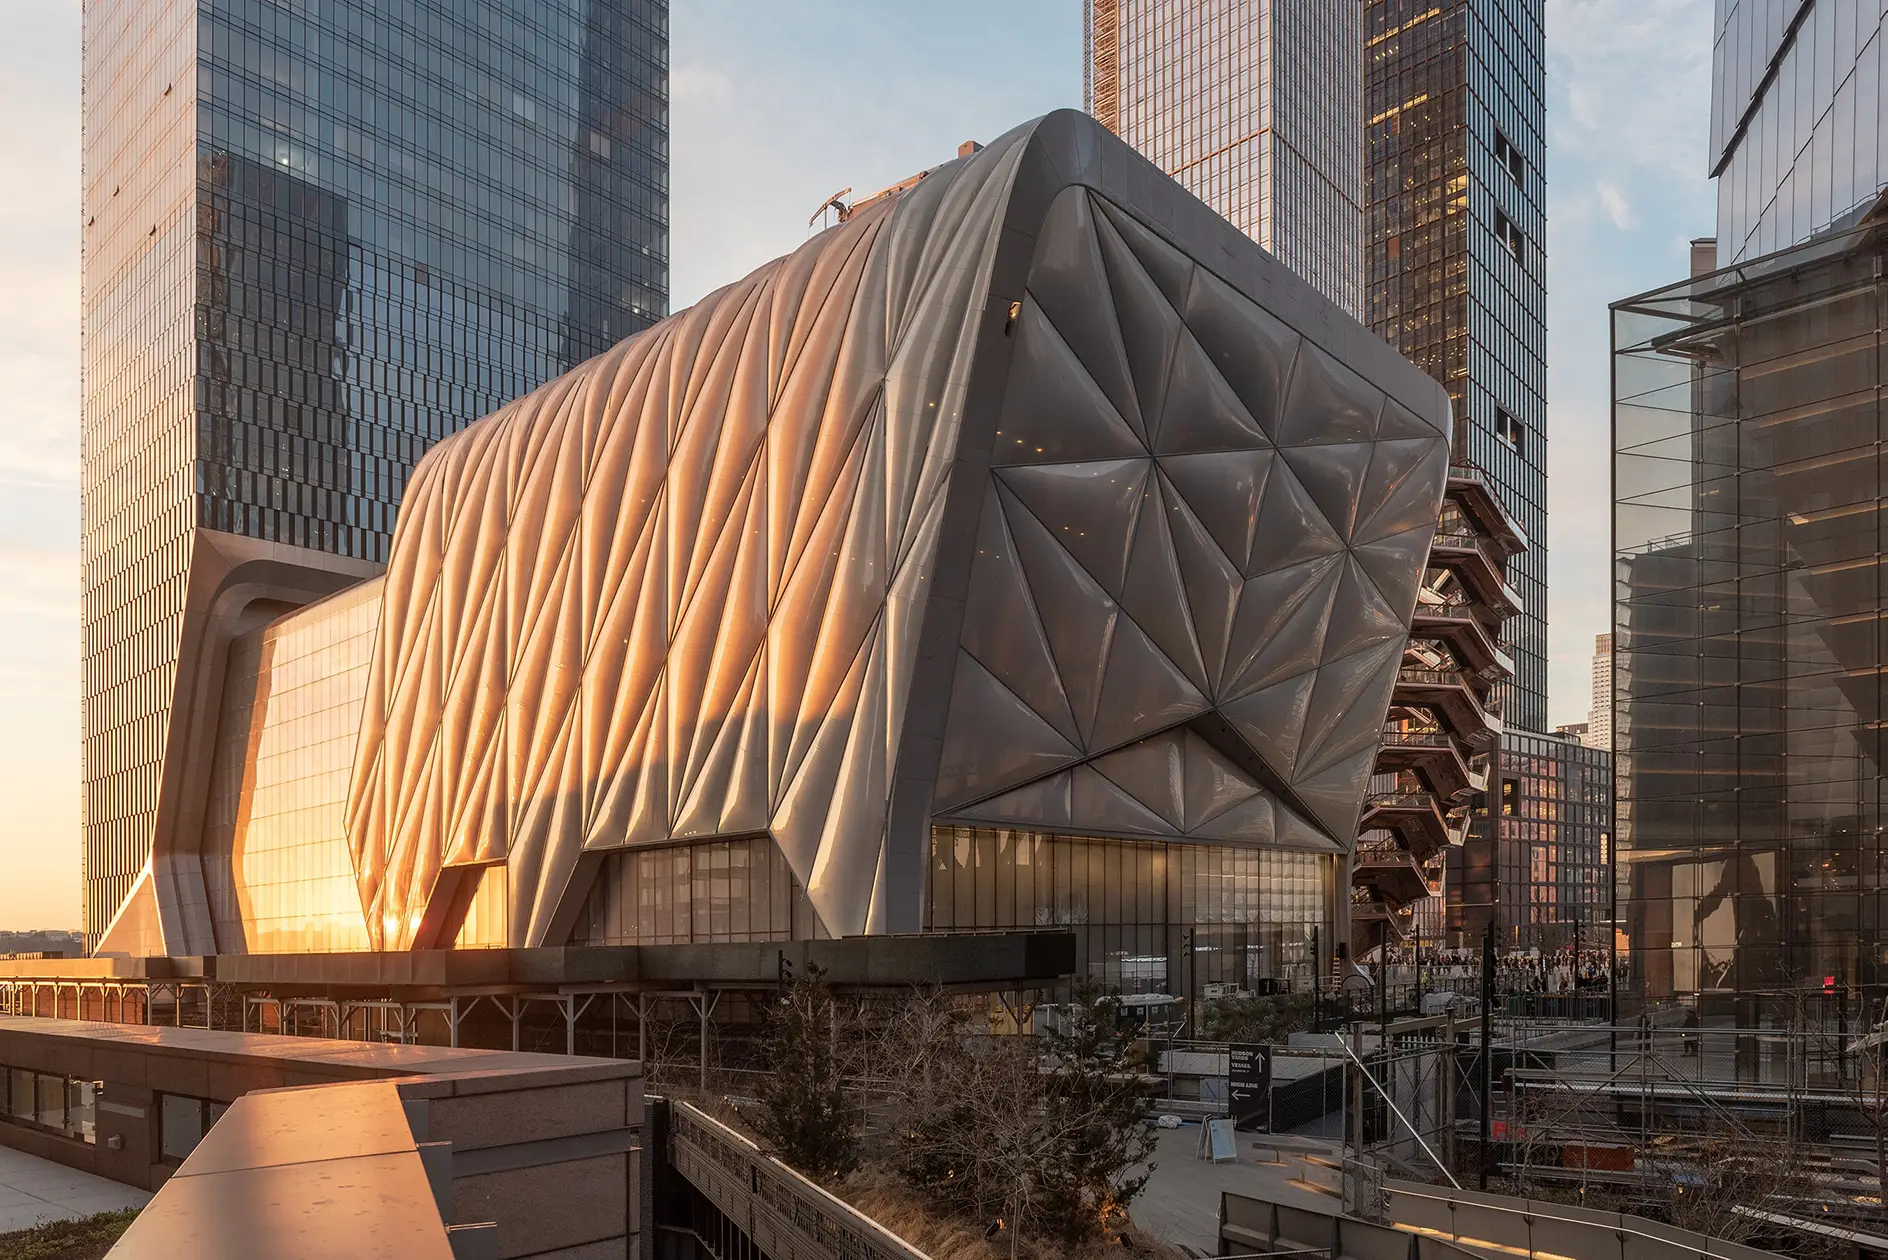 The Shed, is an eight-story building that houses two pillar-free galleries, a 500-seat theater, designed so it can be divided into smaller, separate areas for rehearsals and events.